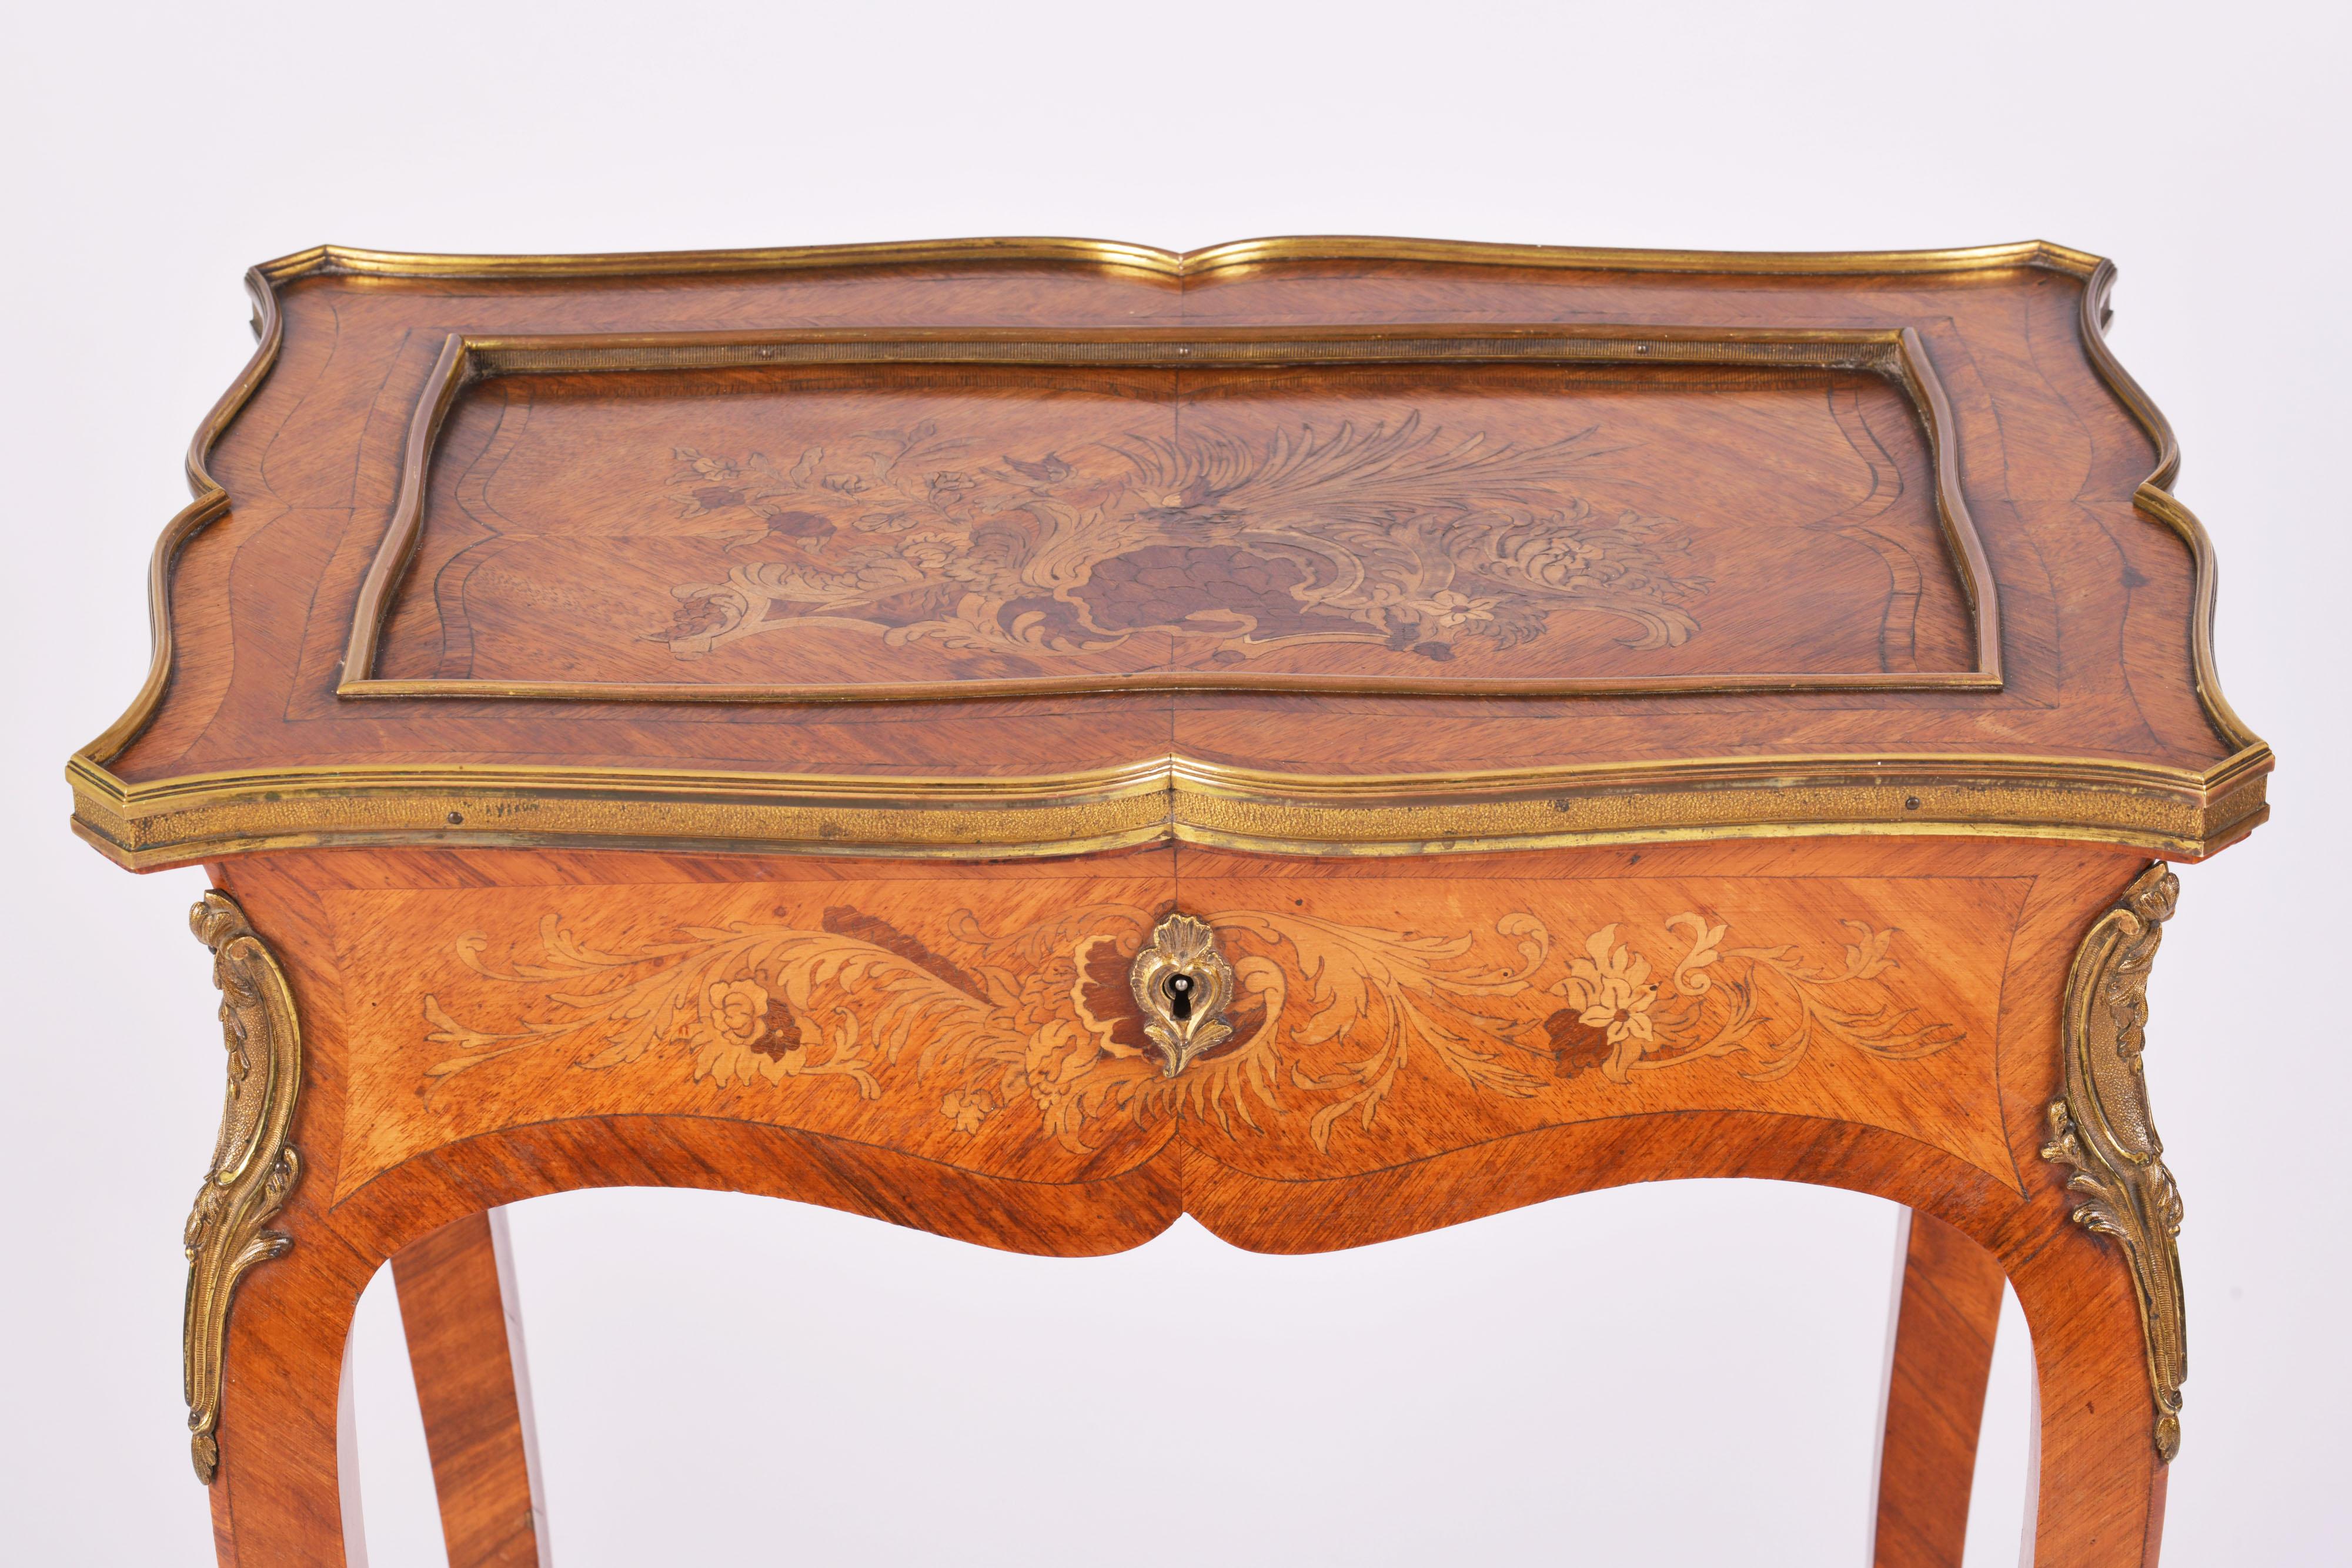 French 19th Century Kingwood Bijouterie Table with Ormolu Mounts